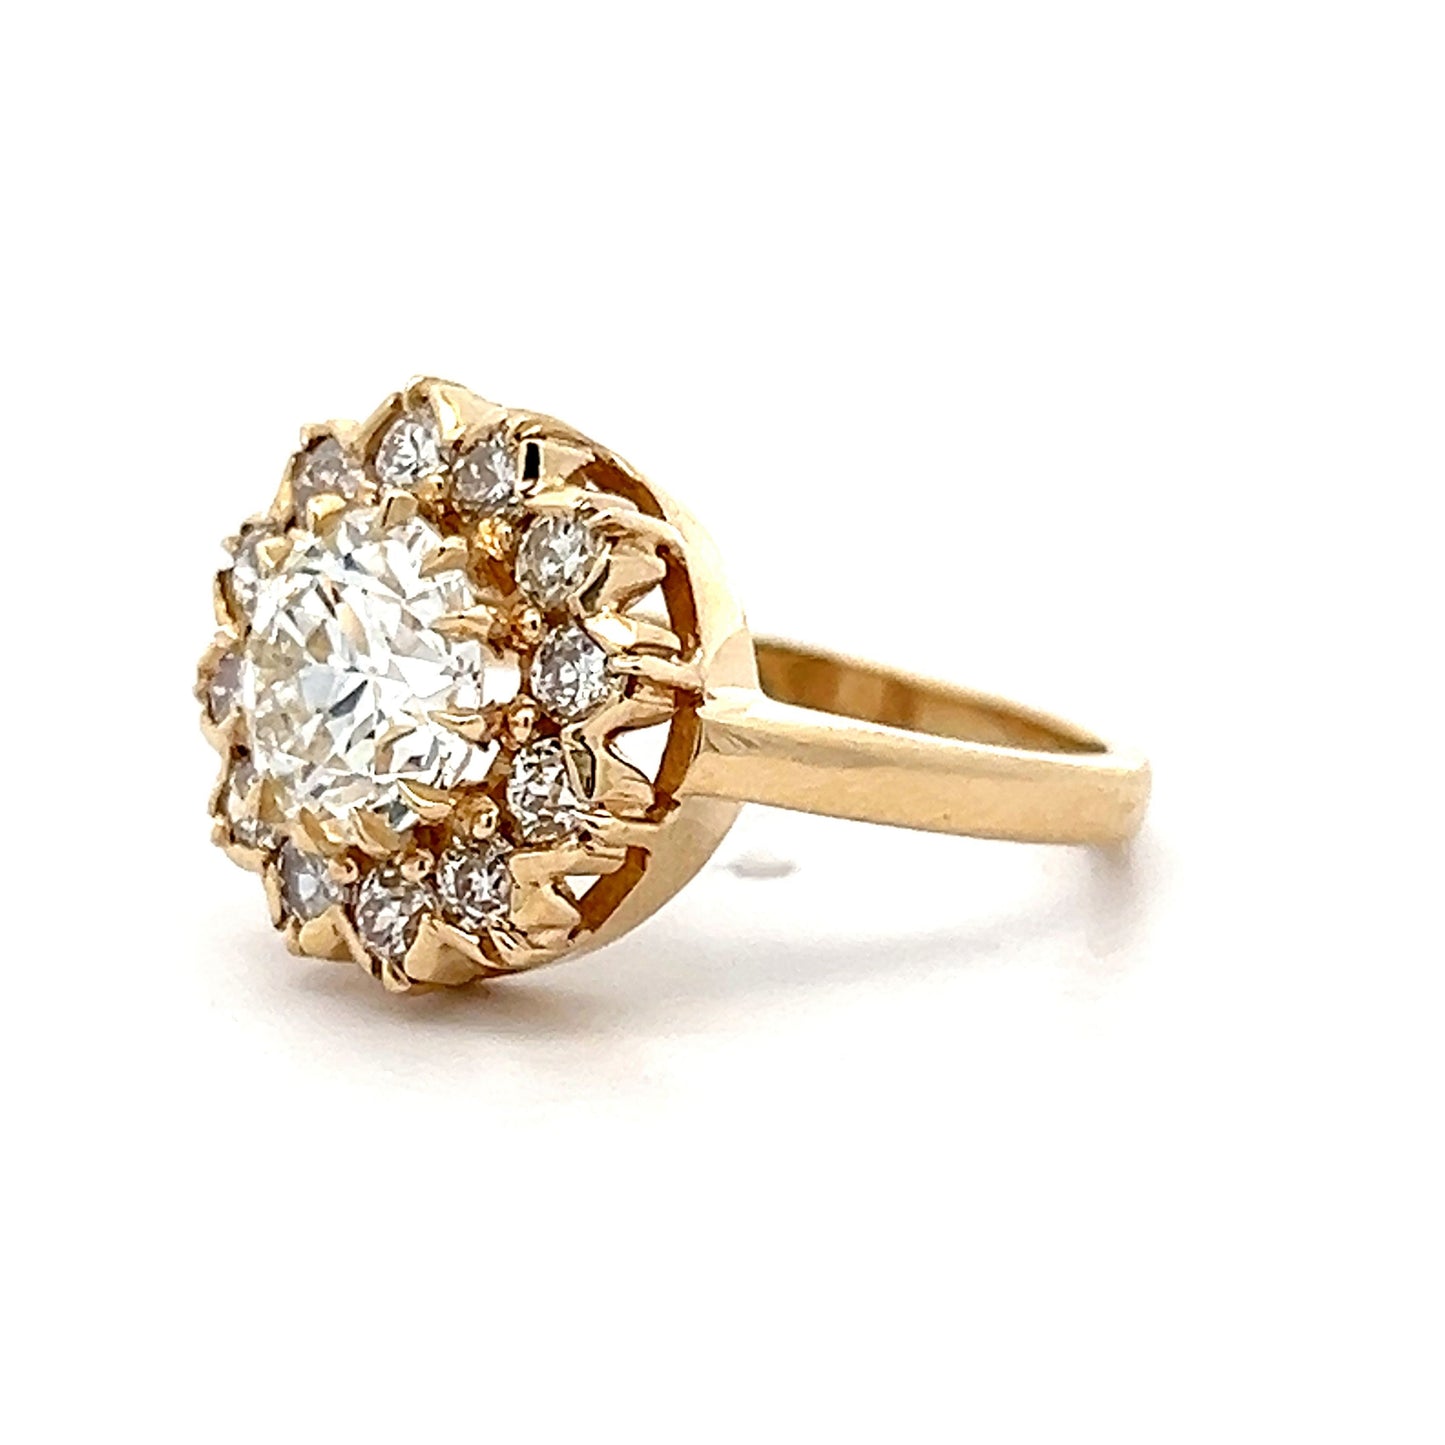 Vintage Victorian Inspired Diamond Halo Engagement Ring in Yellow Gold